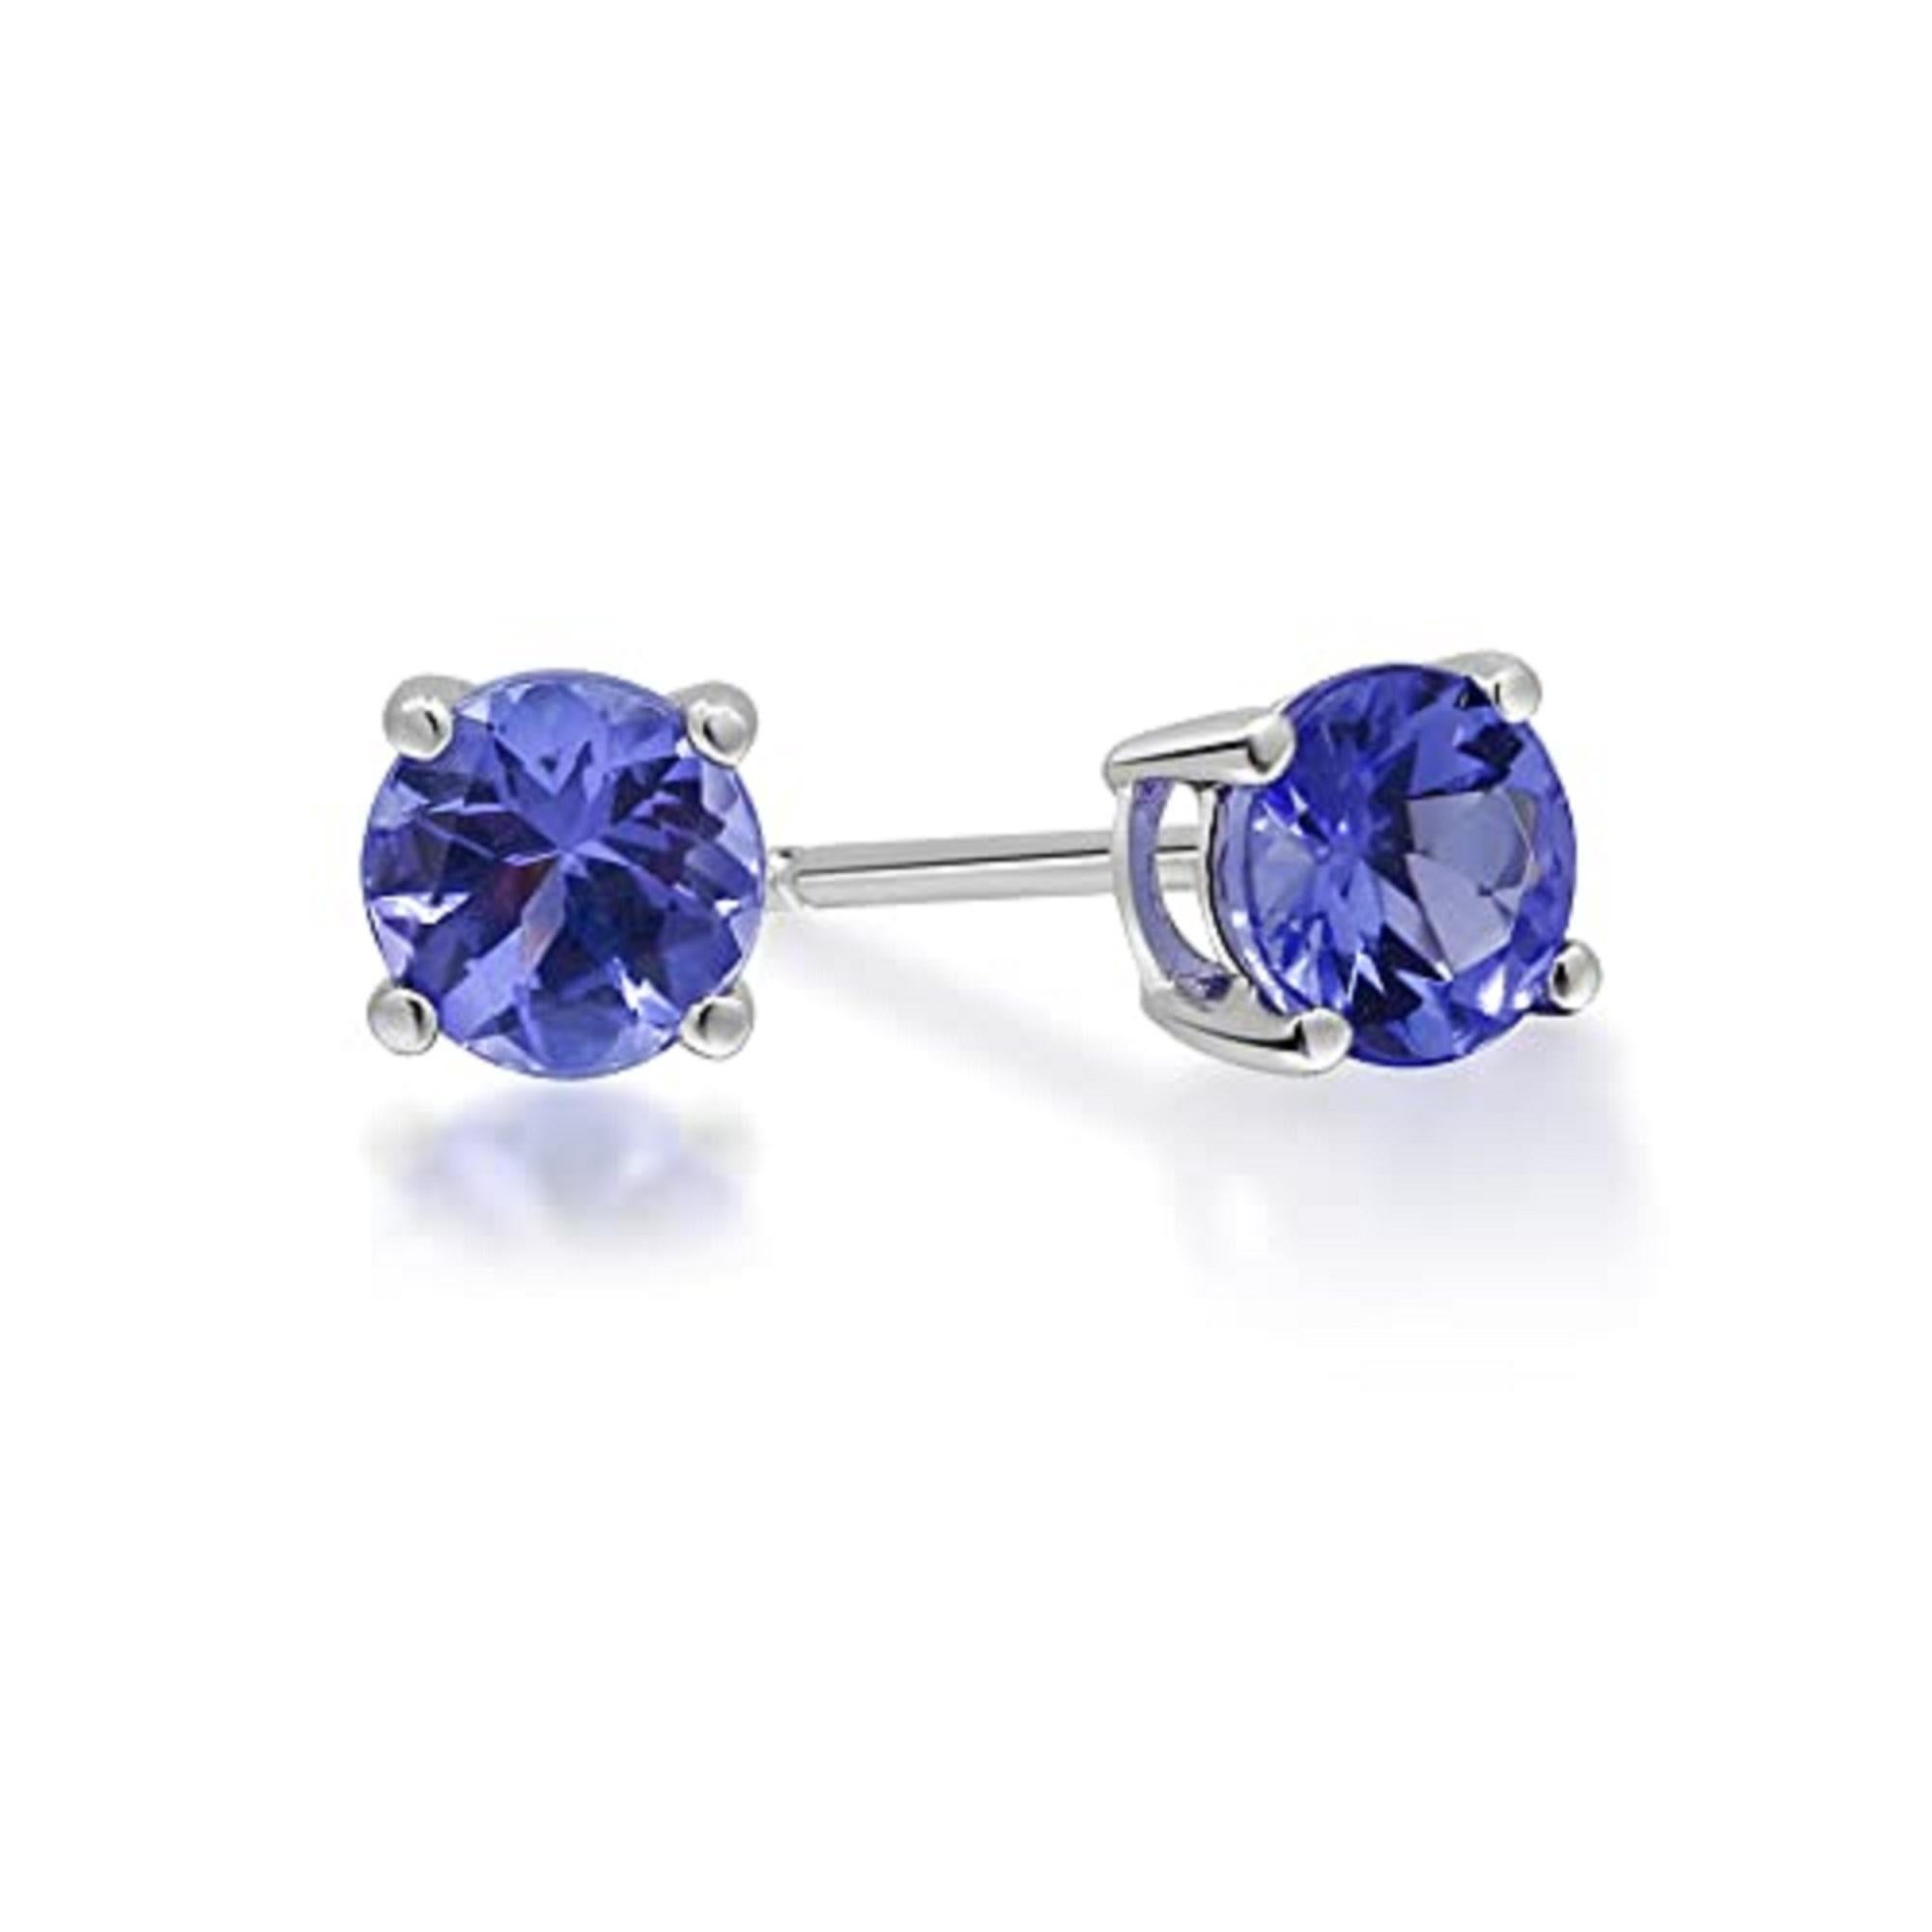 Art Deco 1.02 Carat Round-Cut Tanzanite 925 Sterling Silver Stud Earring For Sale